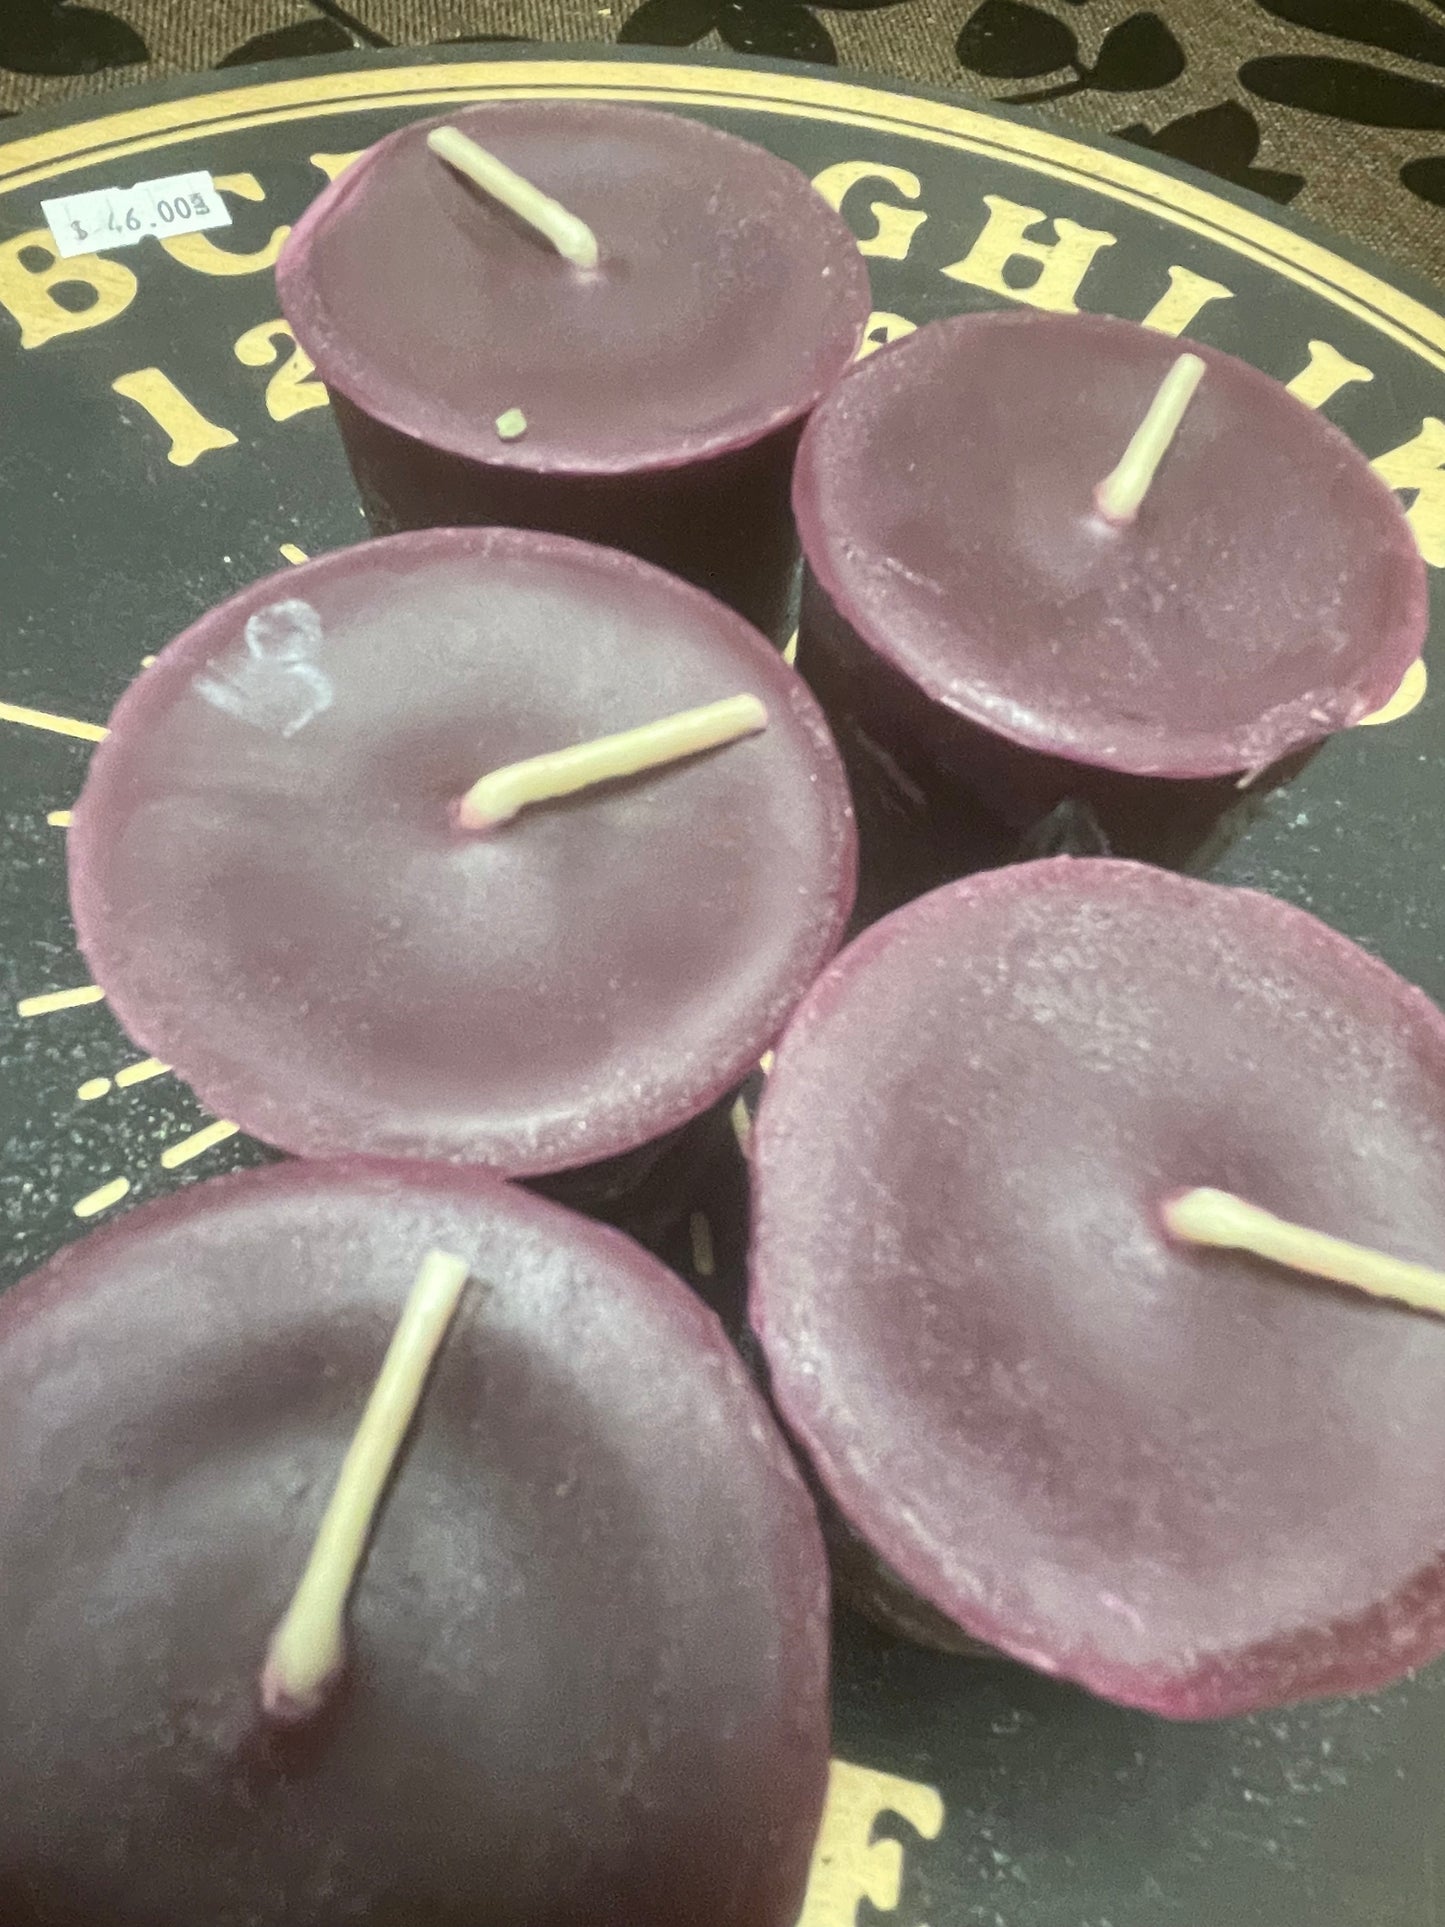 Divine Visions Rune Spell Candle Votive, Dark Purple Beeswax Candle, Lavender Scent